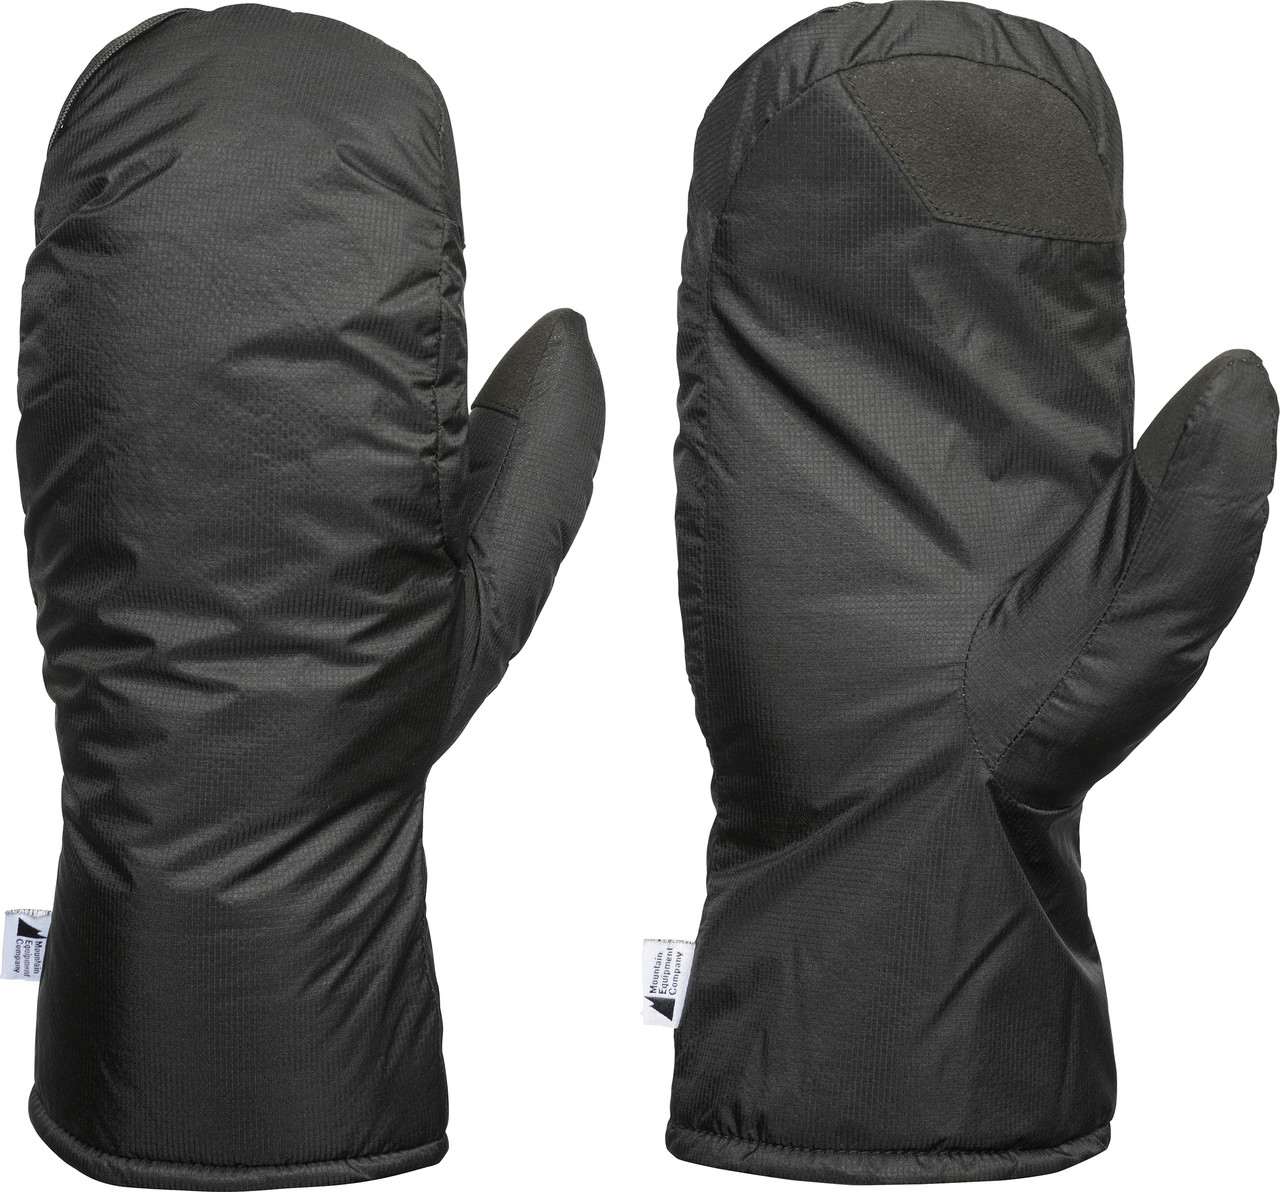 T2 Warmer Insulated Liner Mitts Black